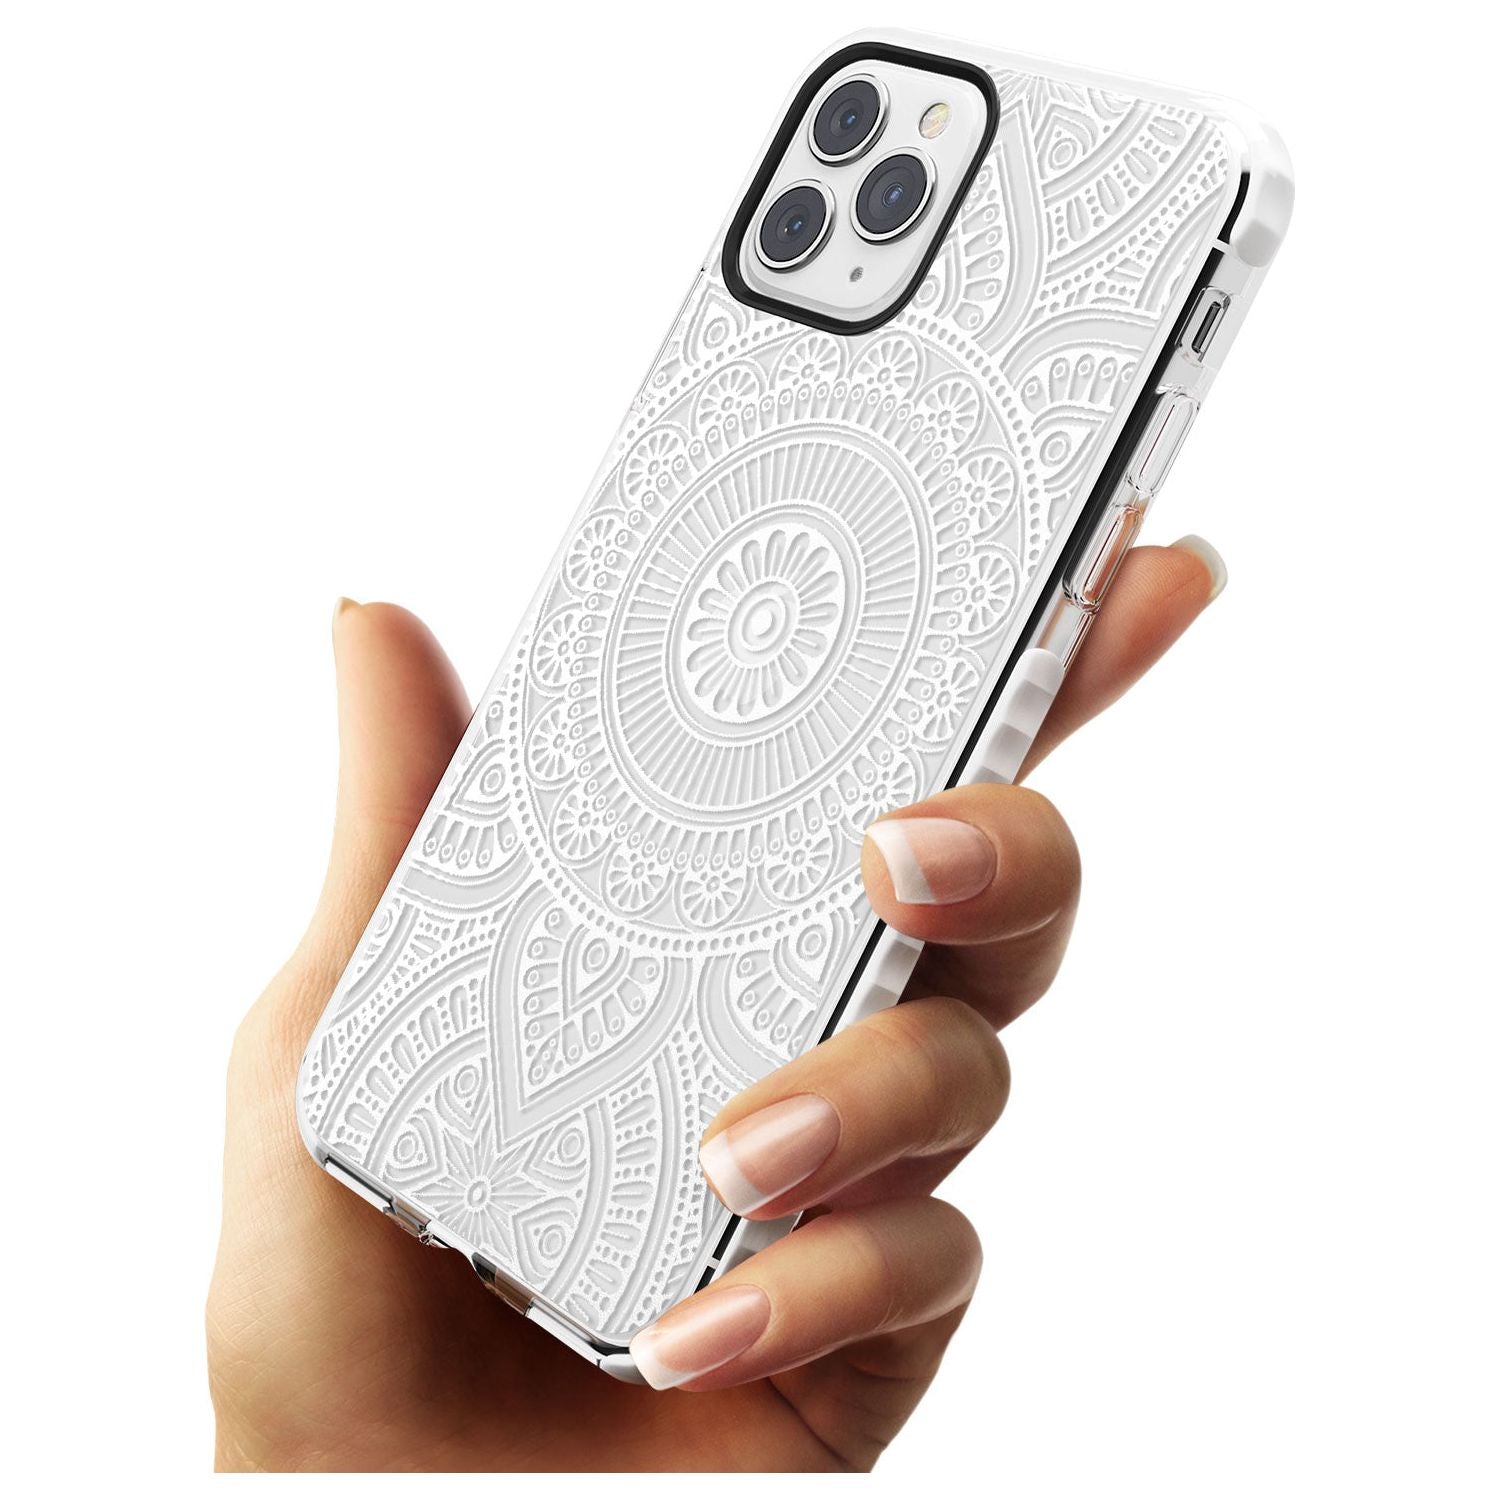 White Henna Flower Wheel Impact Phone Case for iPhone 11 Pro Max